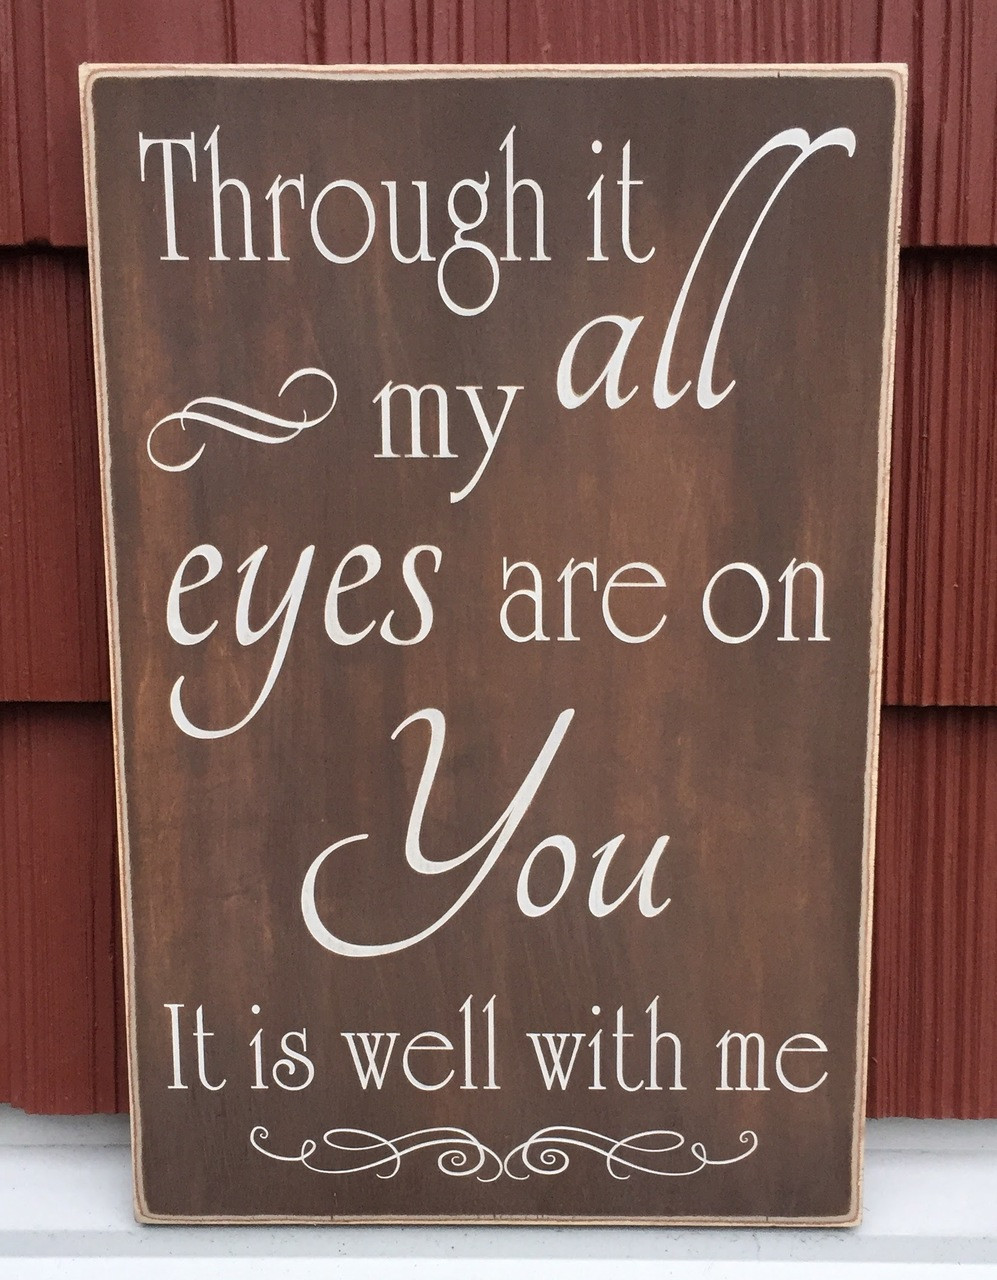 Through it all my eyes are on you. It is well with me - rustic wood sign